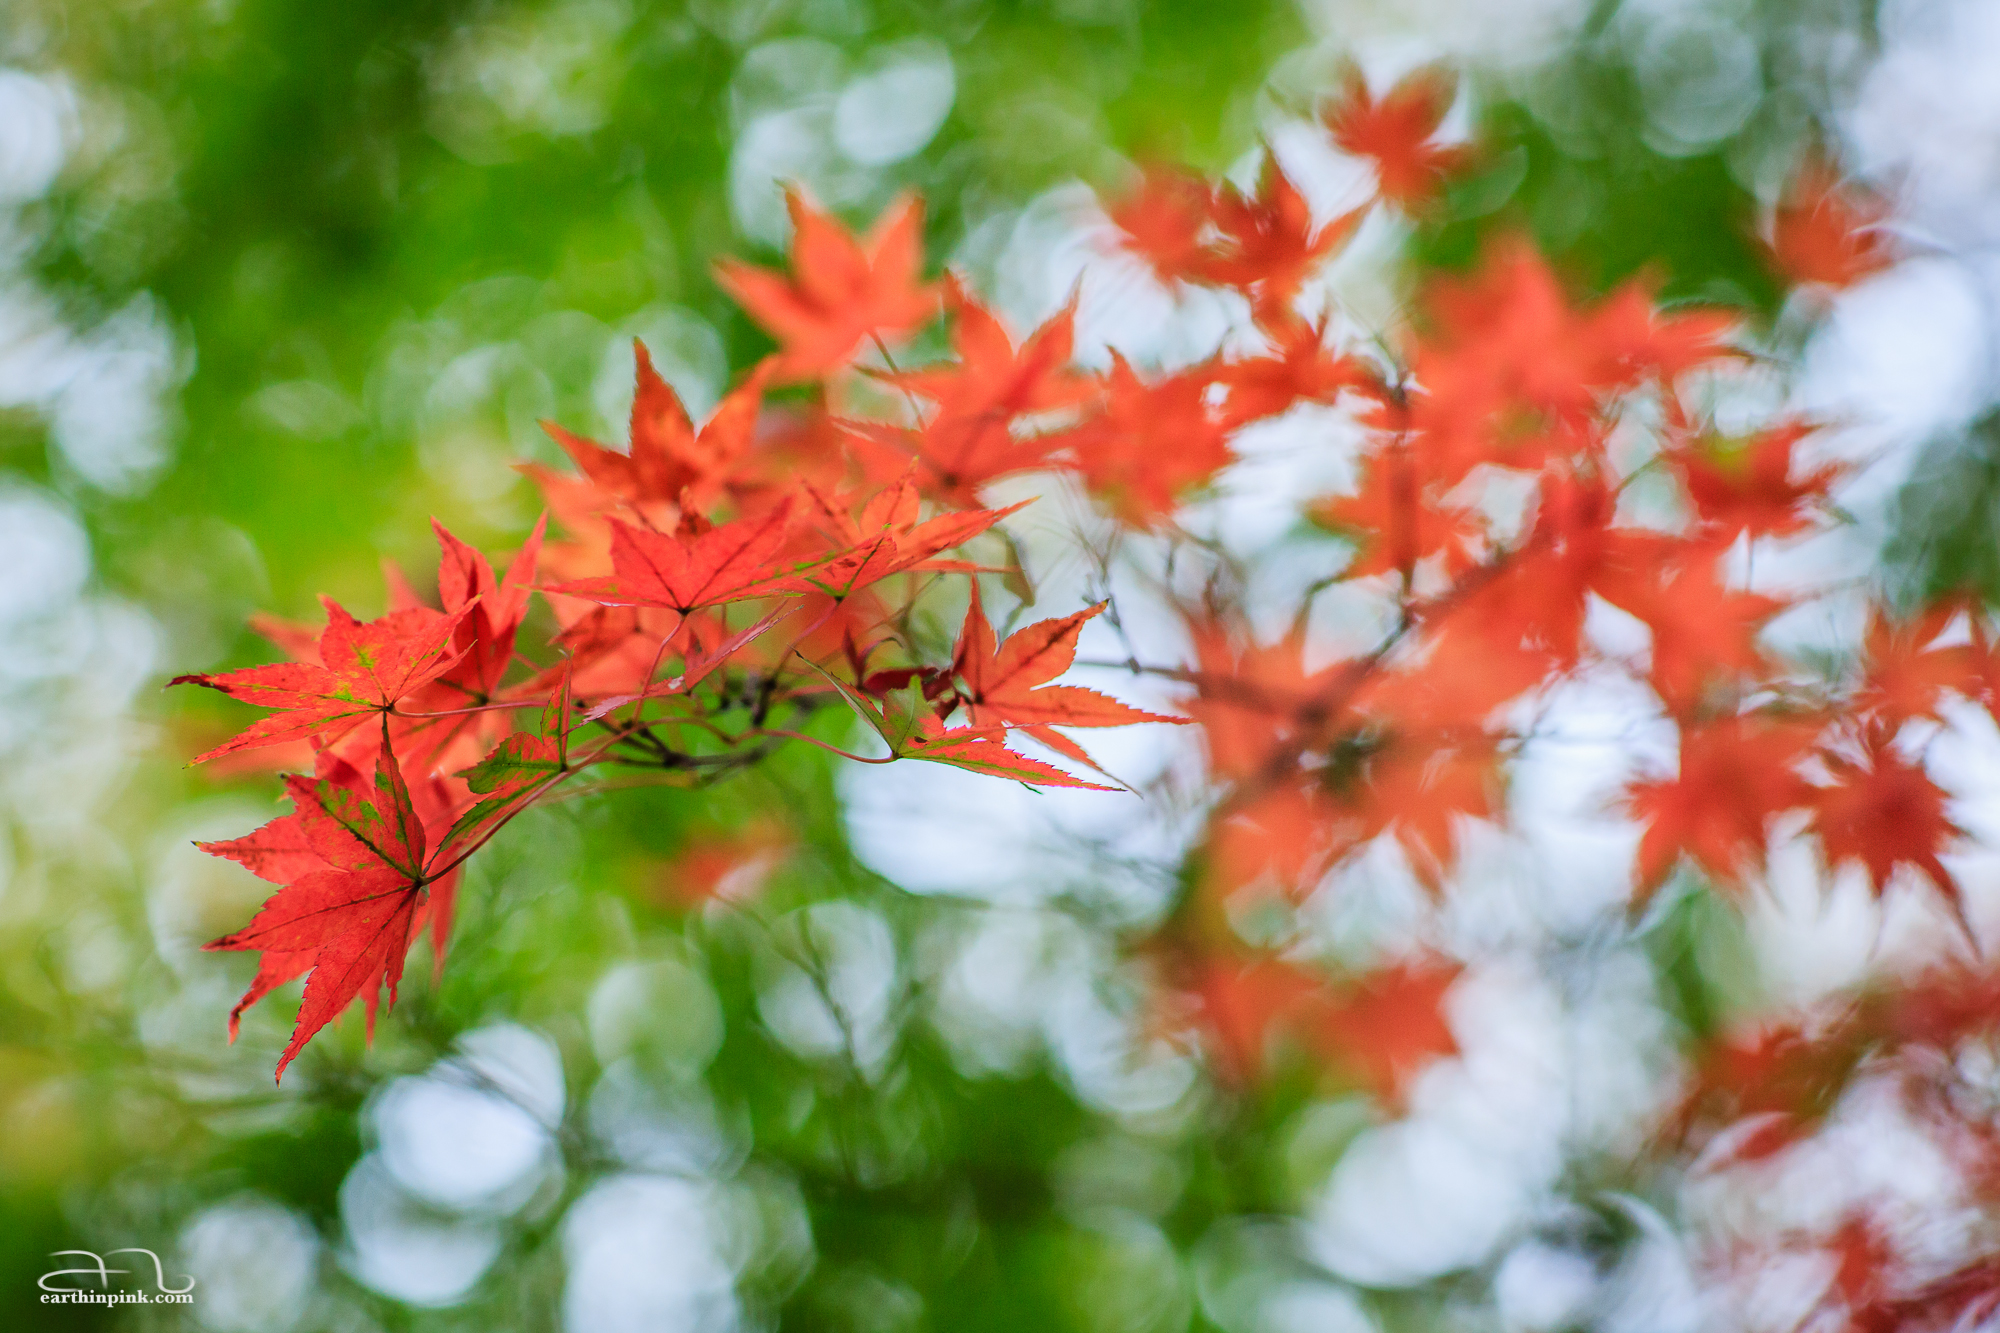 A single branch of a maple tree in Tokyo's Yoyogi park has already turned red, while the rest of the tree still sports its summer coat of green.